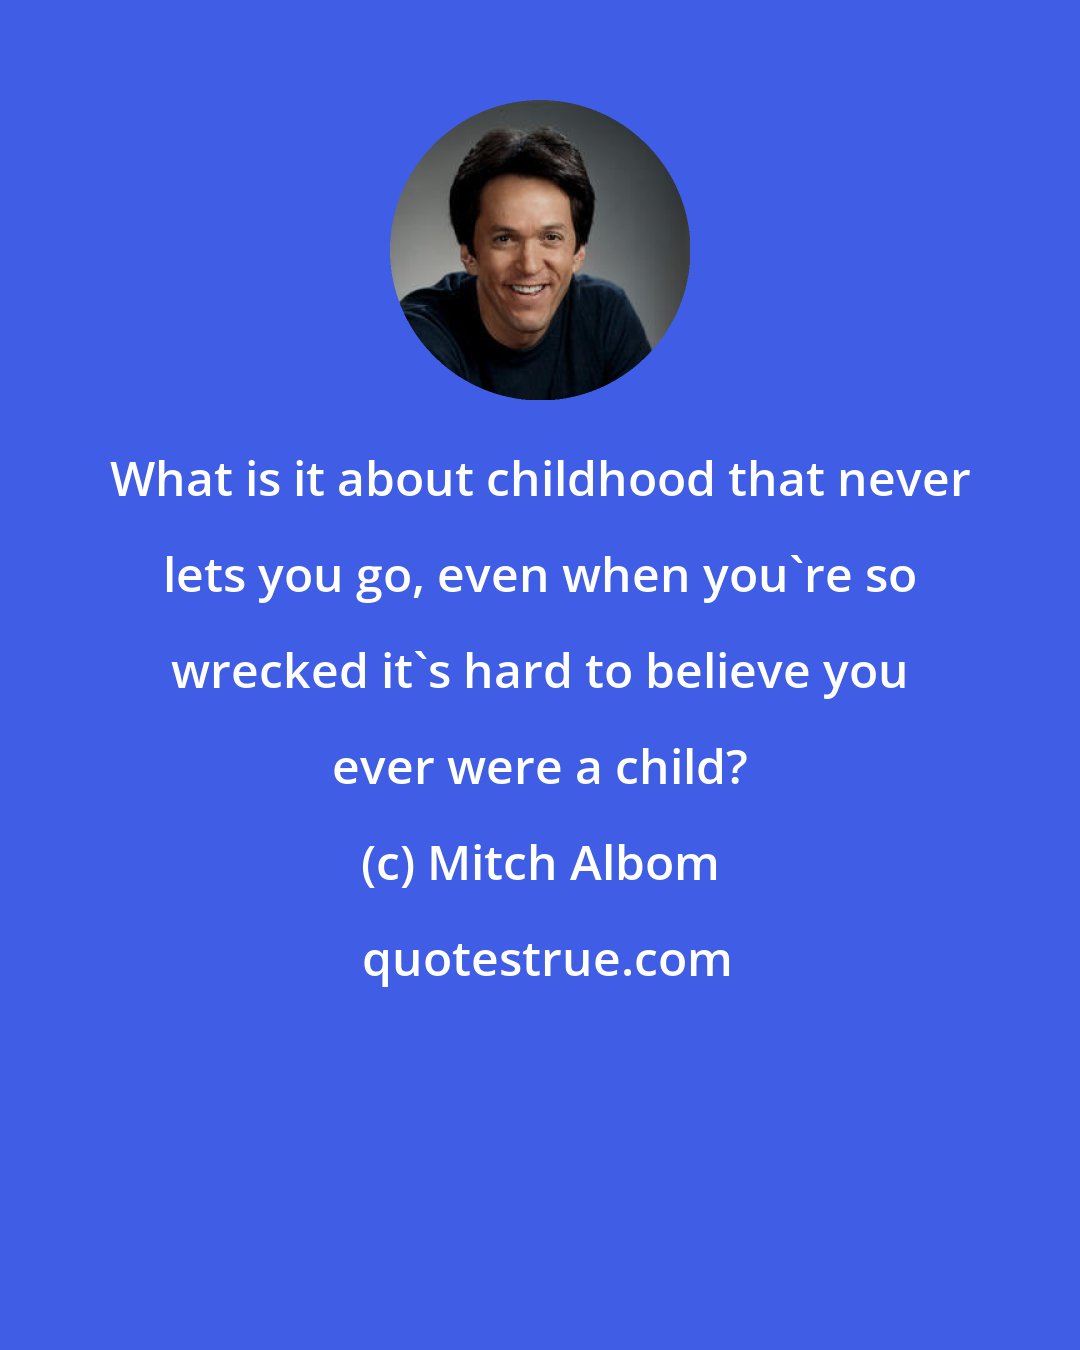 Mitch Albom: What is it about childhood that never lets you go, even when you're so wrecked it's hard to believe you ever were a child?